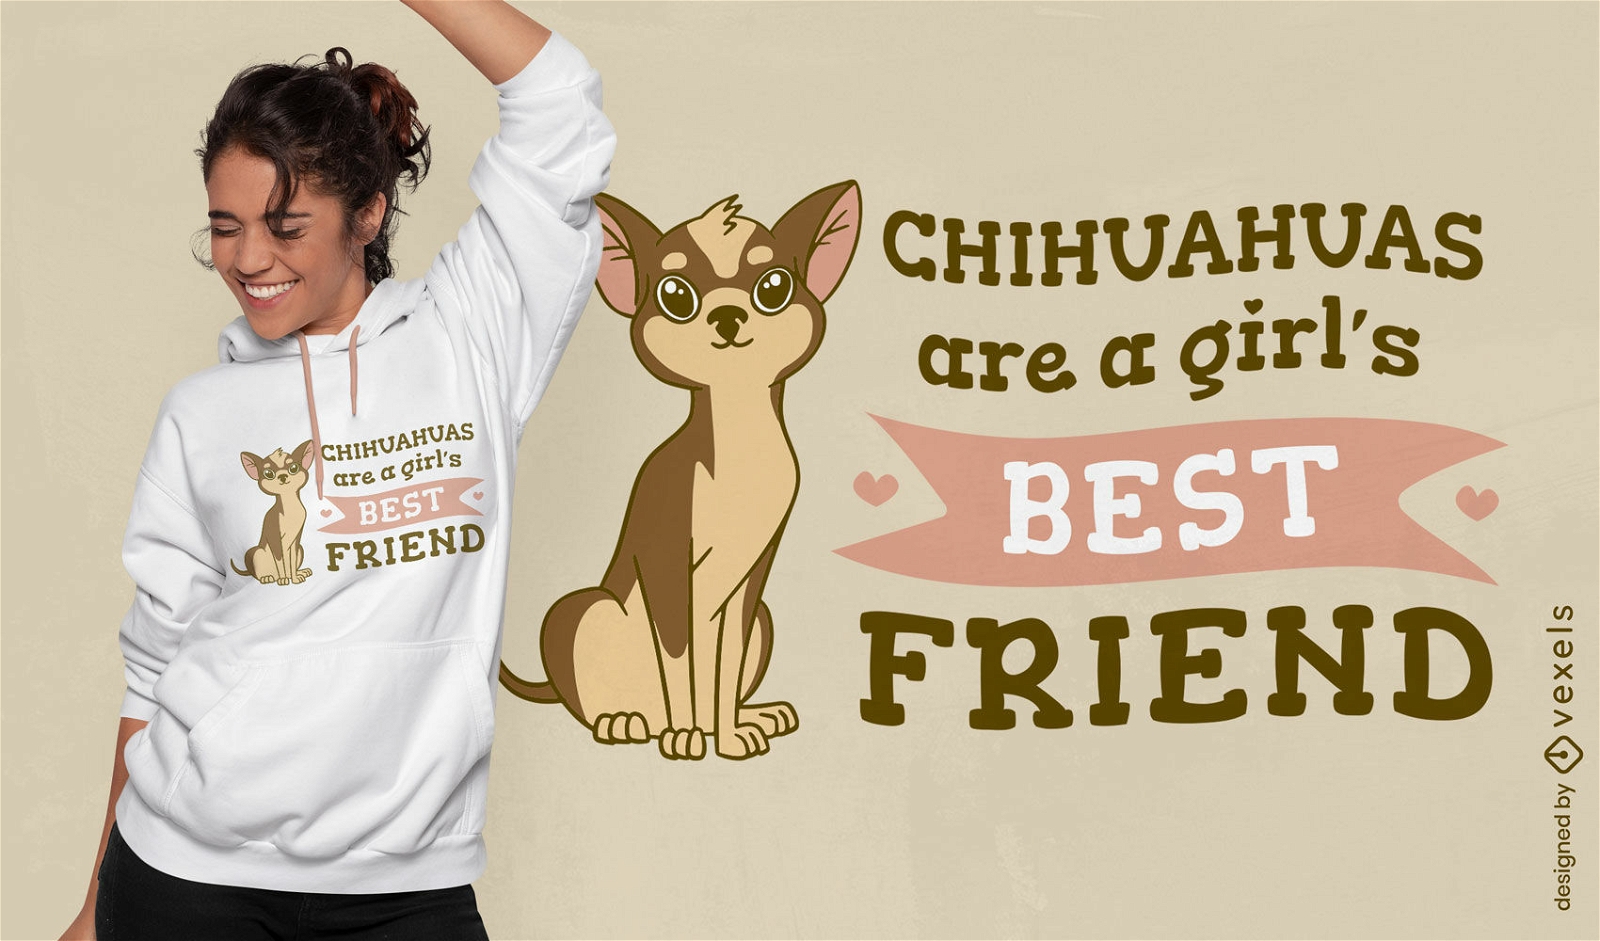 Chihuahua and girl dog friend t-shirt design